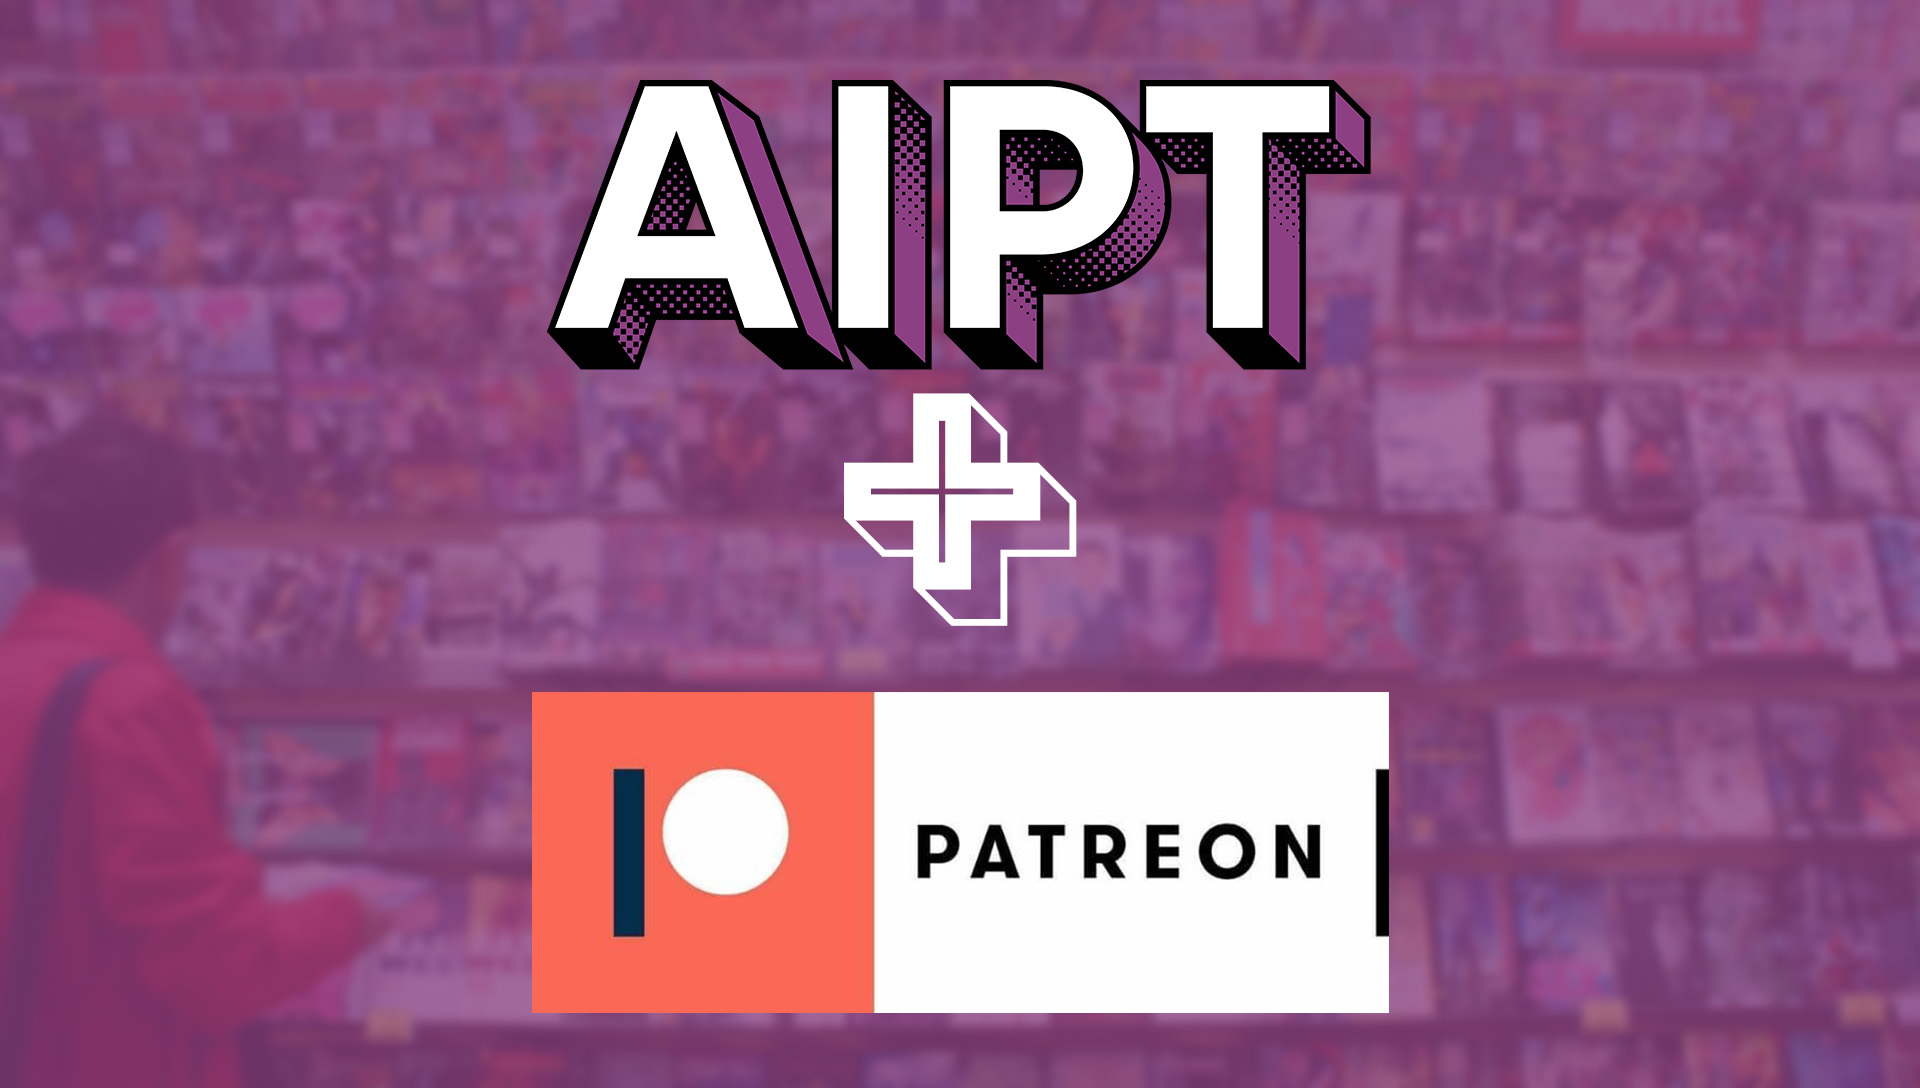 Introducing the AIPT Patreon: Support independent comics journalism!